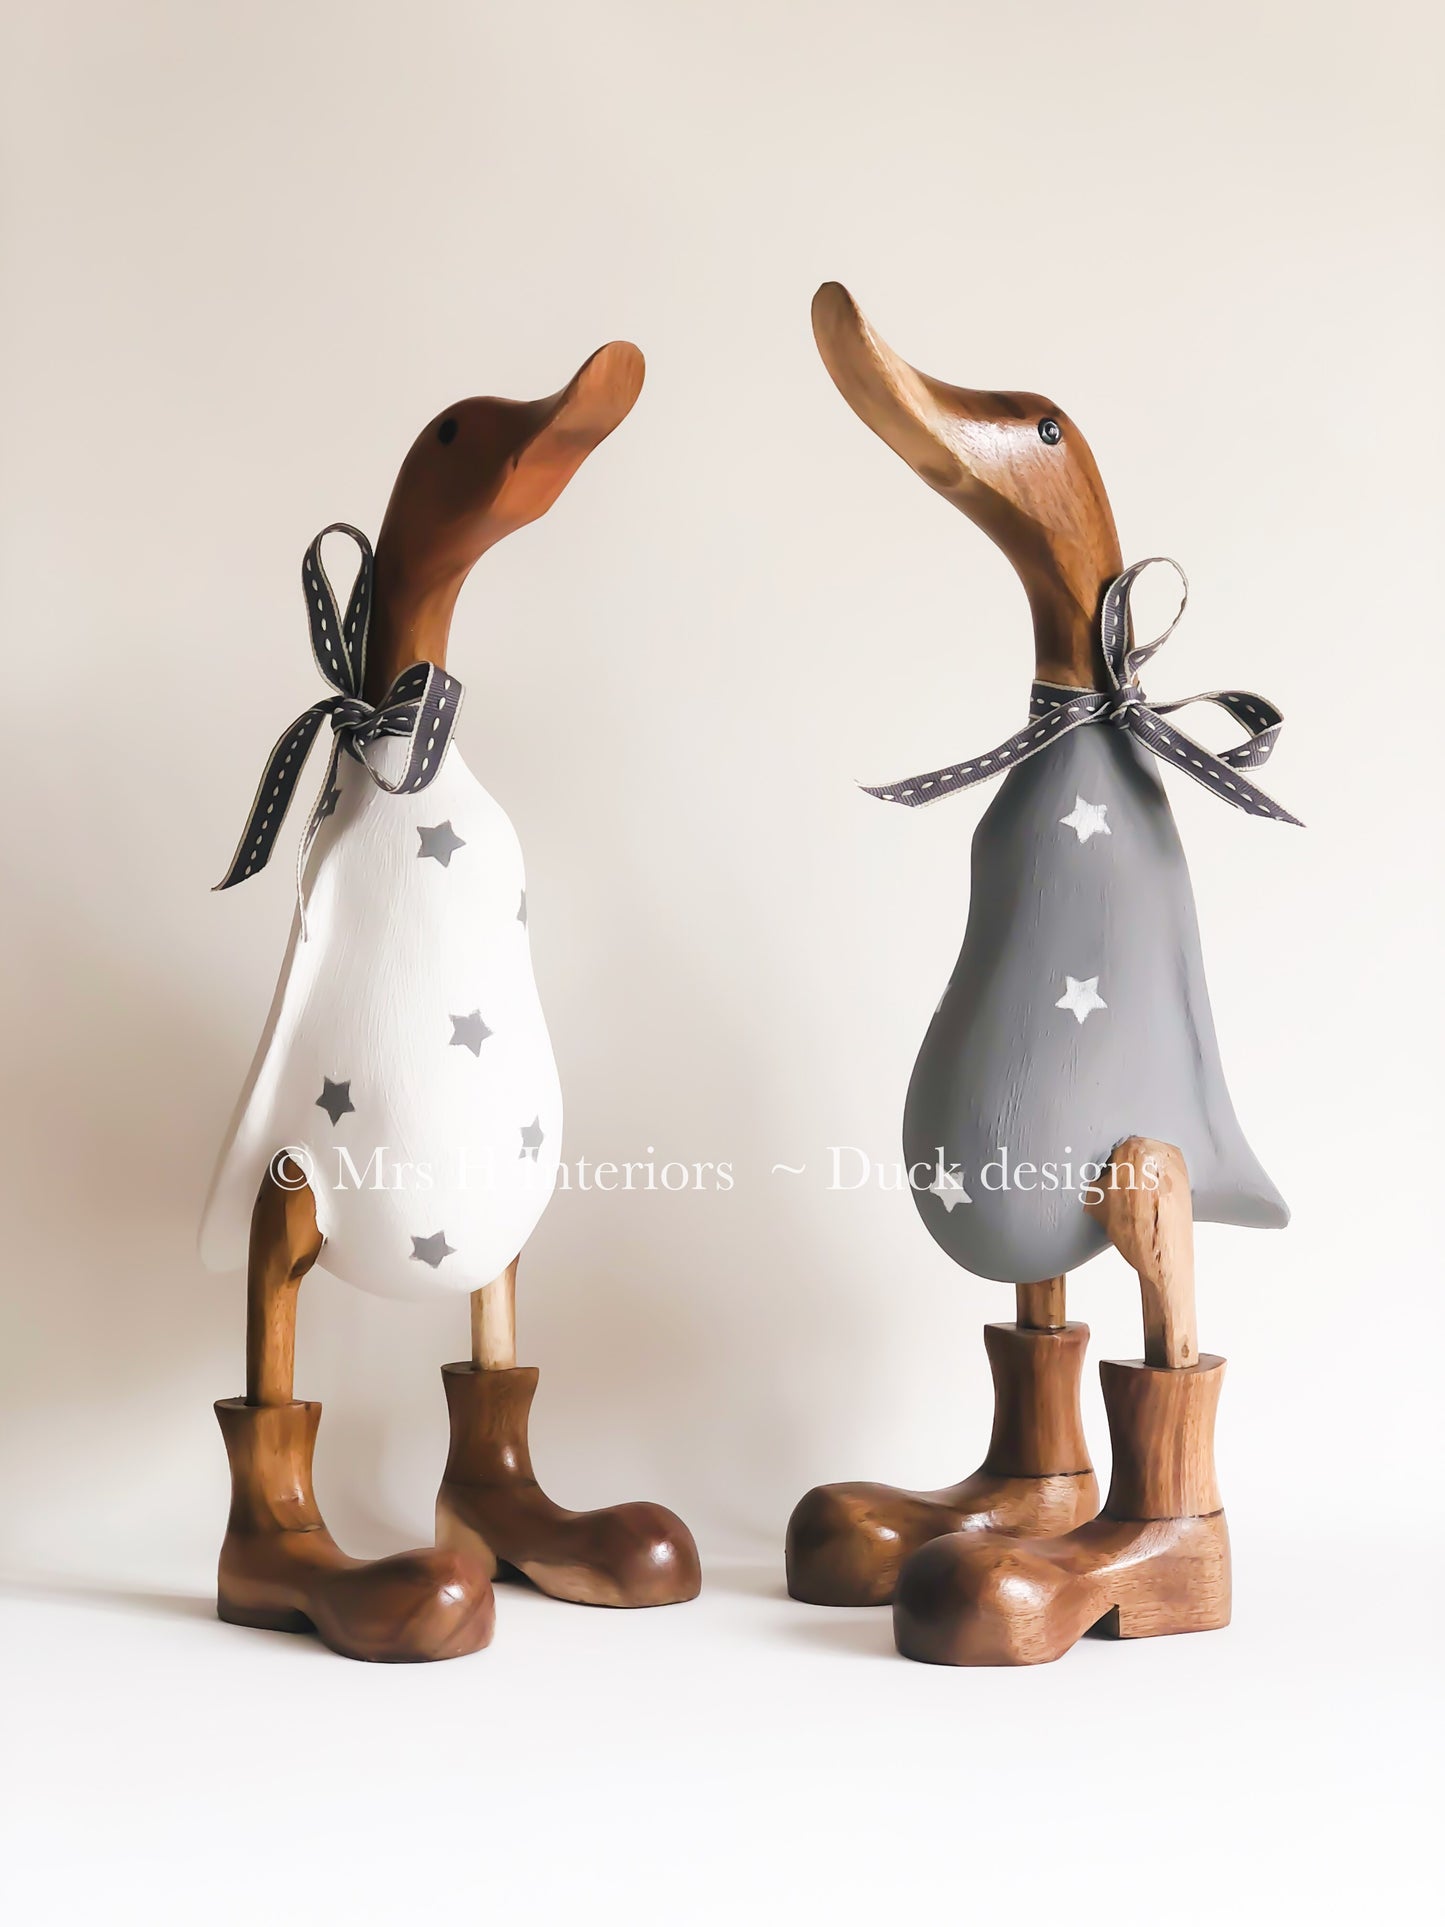 Family of Two Wooden Ducks - Decorated Wooden Duck in Boots by Mrs H the Duck Lady